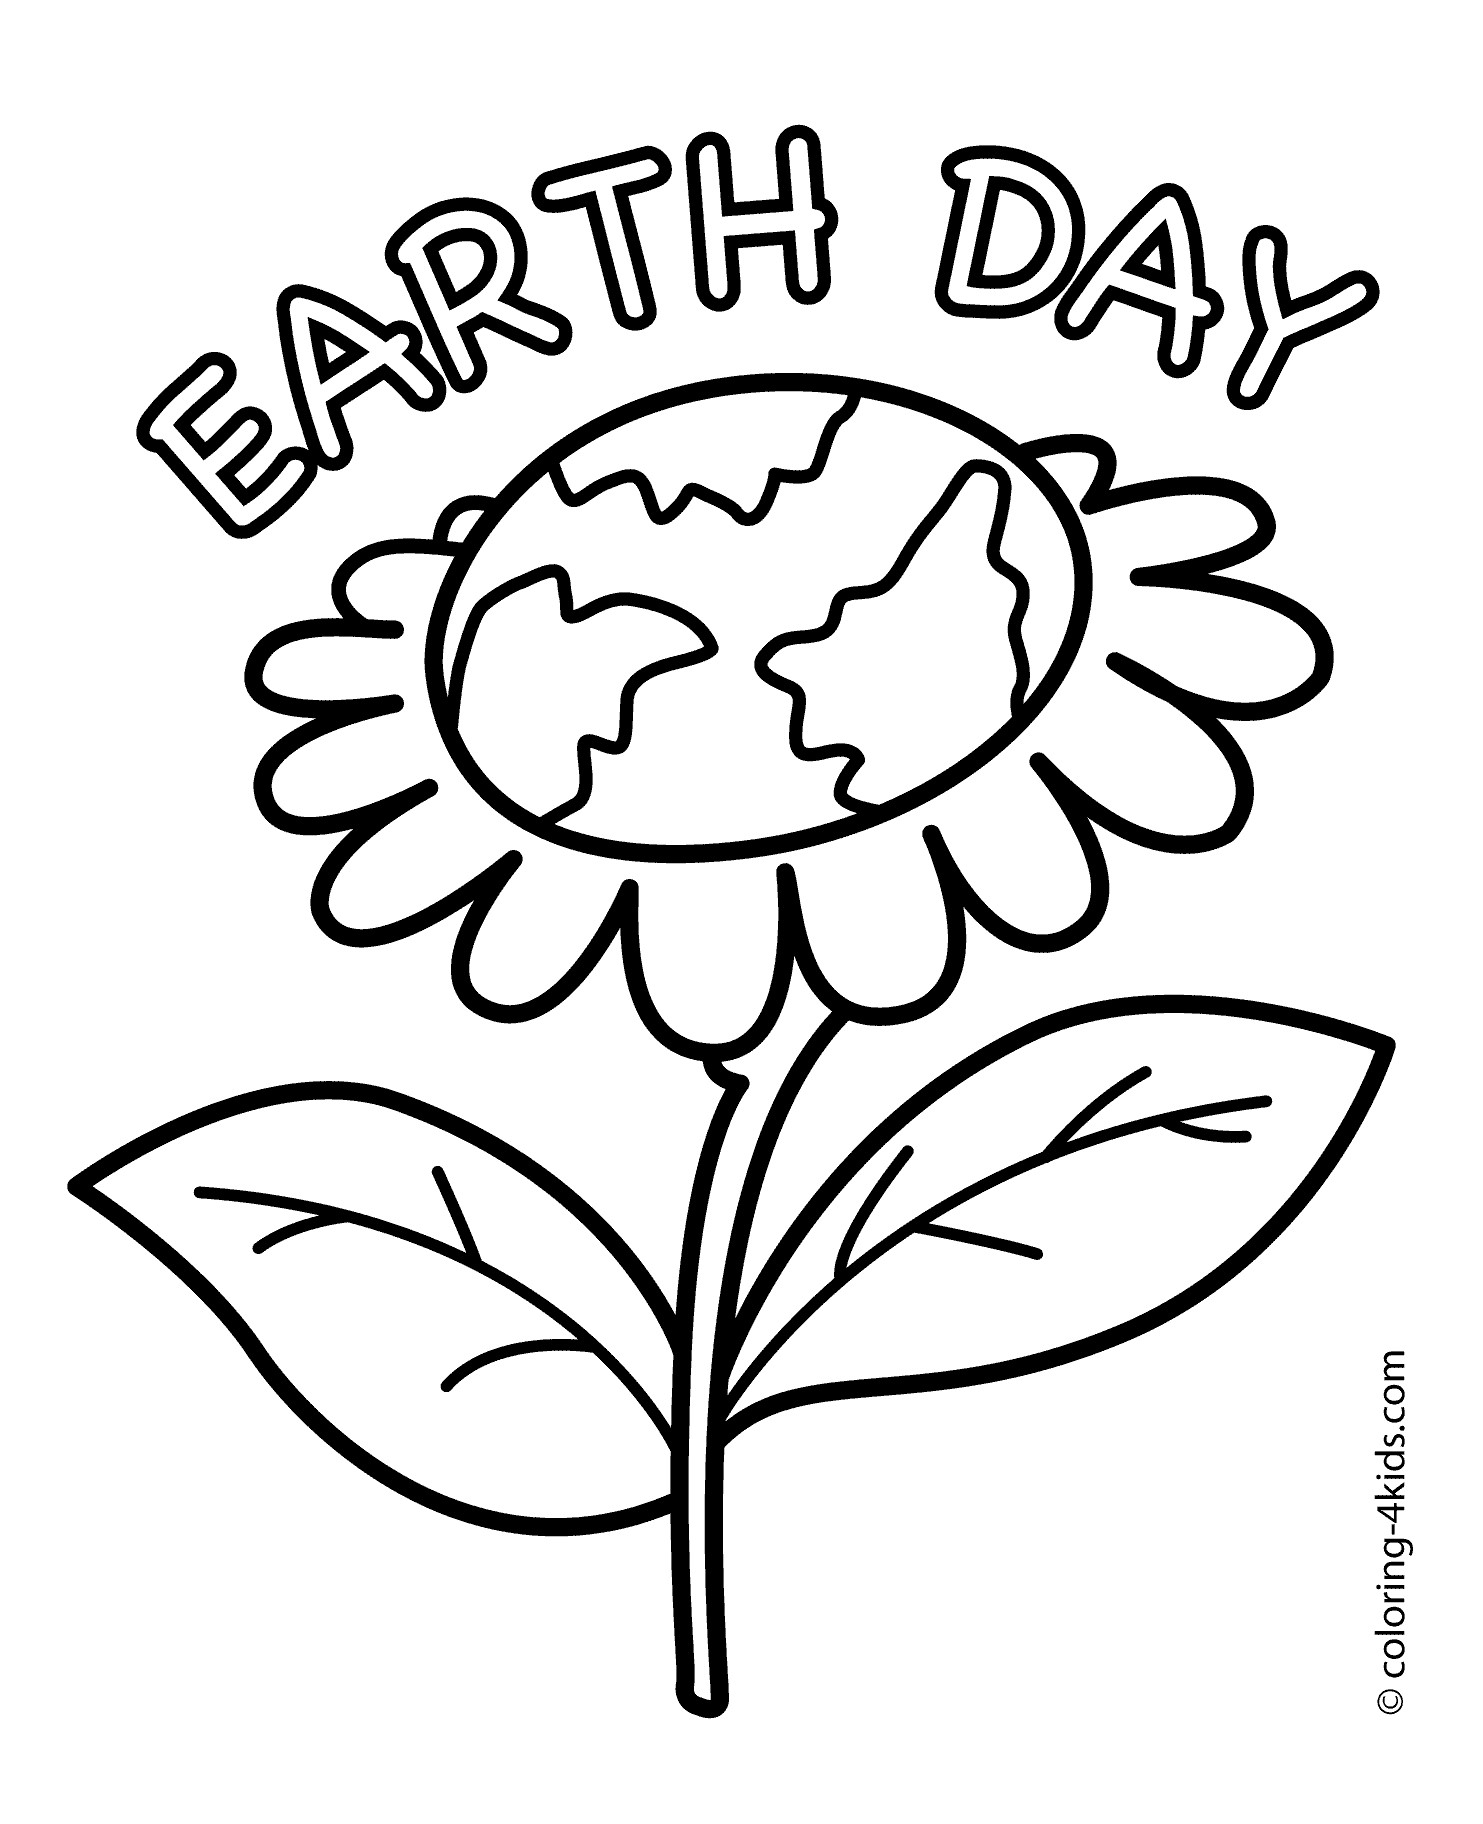 Earth Day Coloring Pages Kindergarten at GetColorings.com | Free